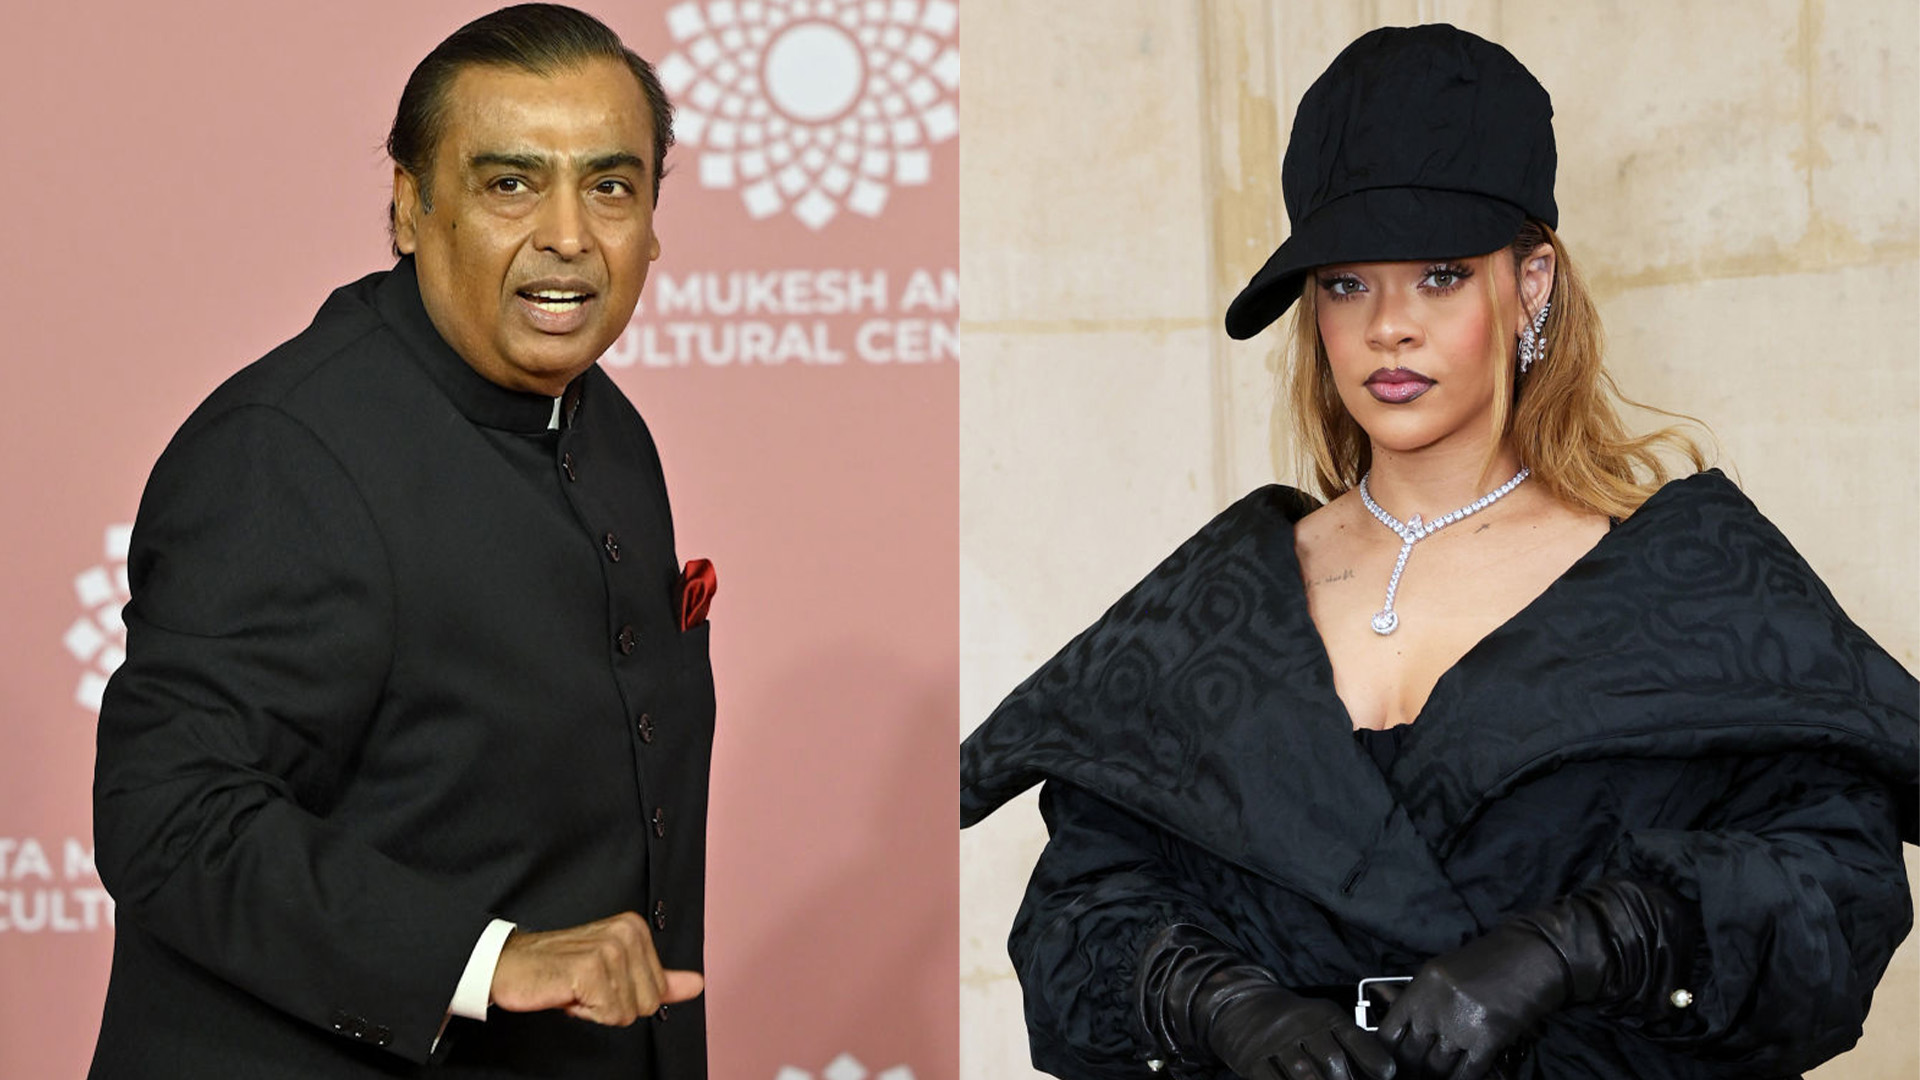 Who Is Mukesh Ambani? The Richest Man In India Who Just Reportedly Paid Rihanna Millions To Perform At His Son's Pre-Wedding Party